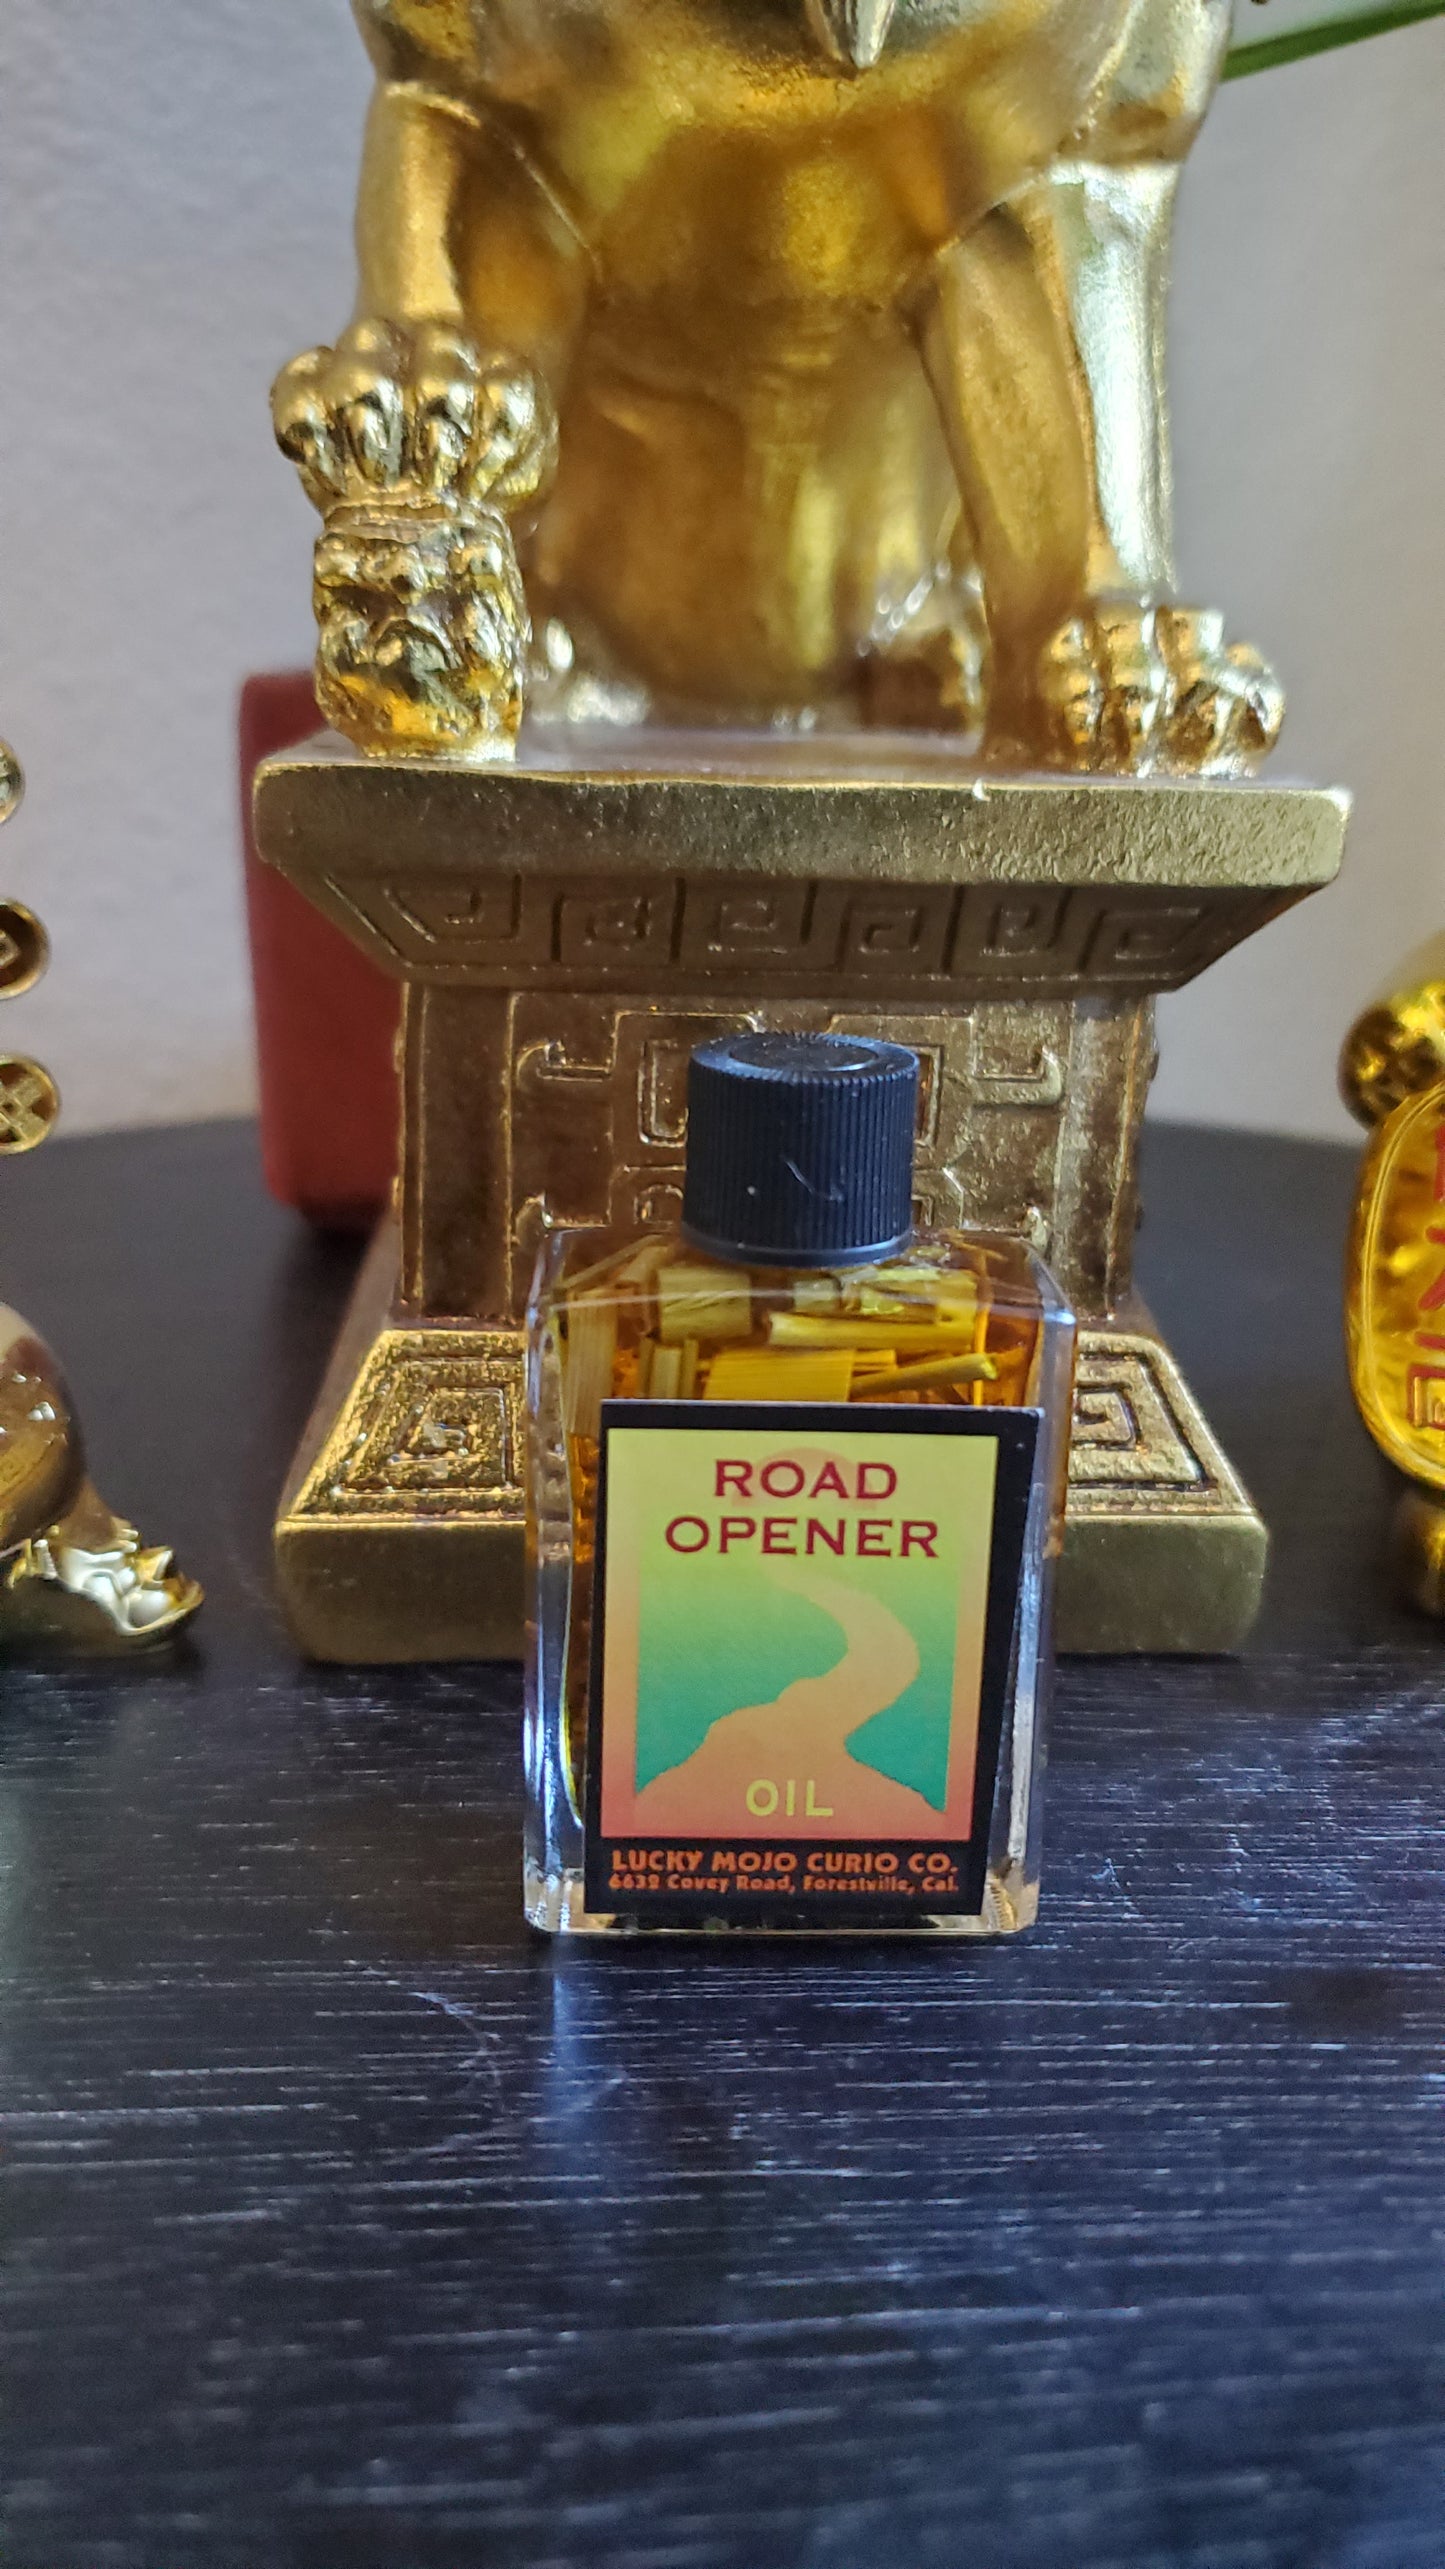 LuckyMojoCurioCo "Road Opener Oil" Anointing / Conjure Oil #Great Deal #LuckyMojoCurioCo #LuckyMojo #EffectiveOils #BlockageRemovalOil